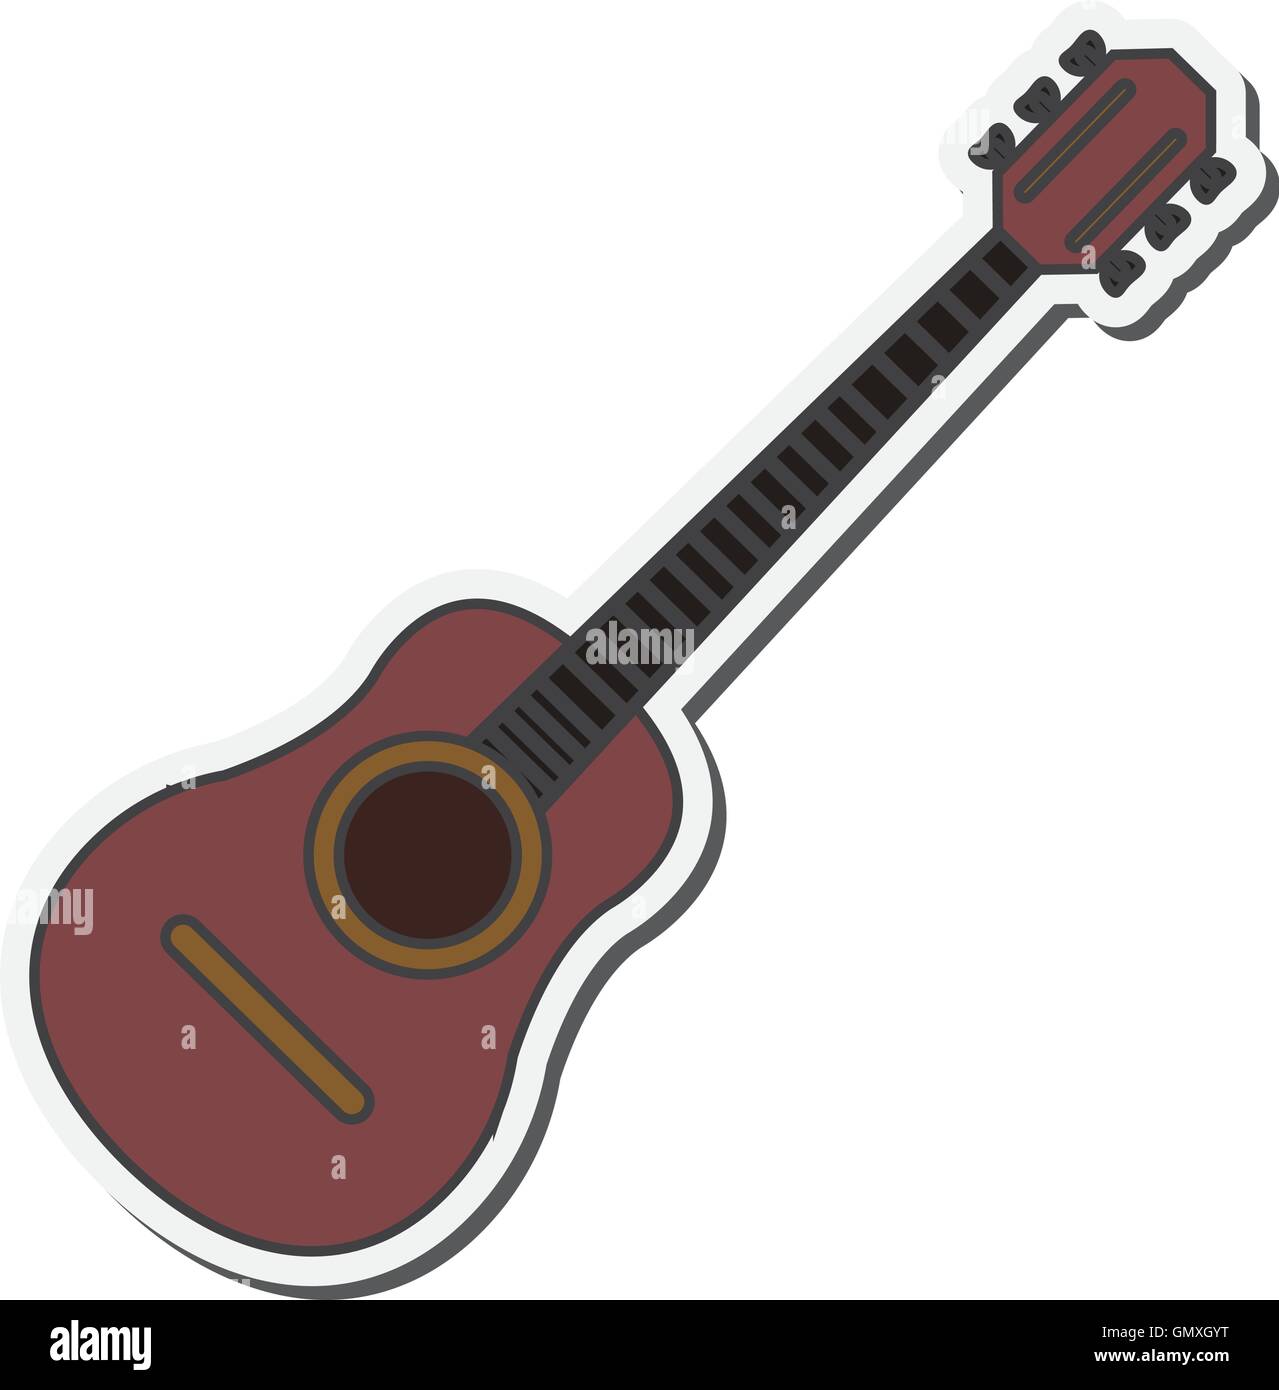 acoustic guitar icon Stock Vector